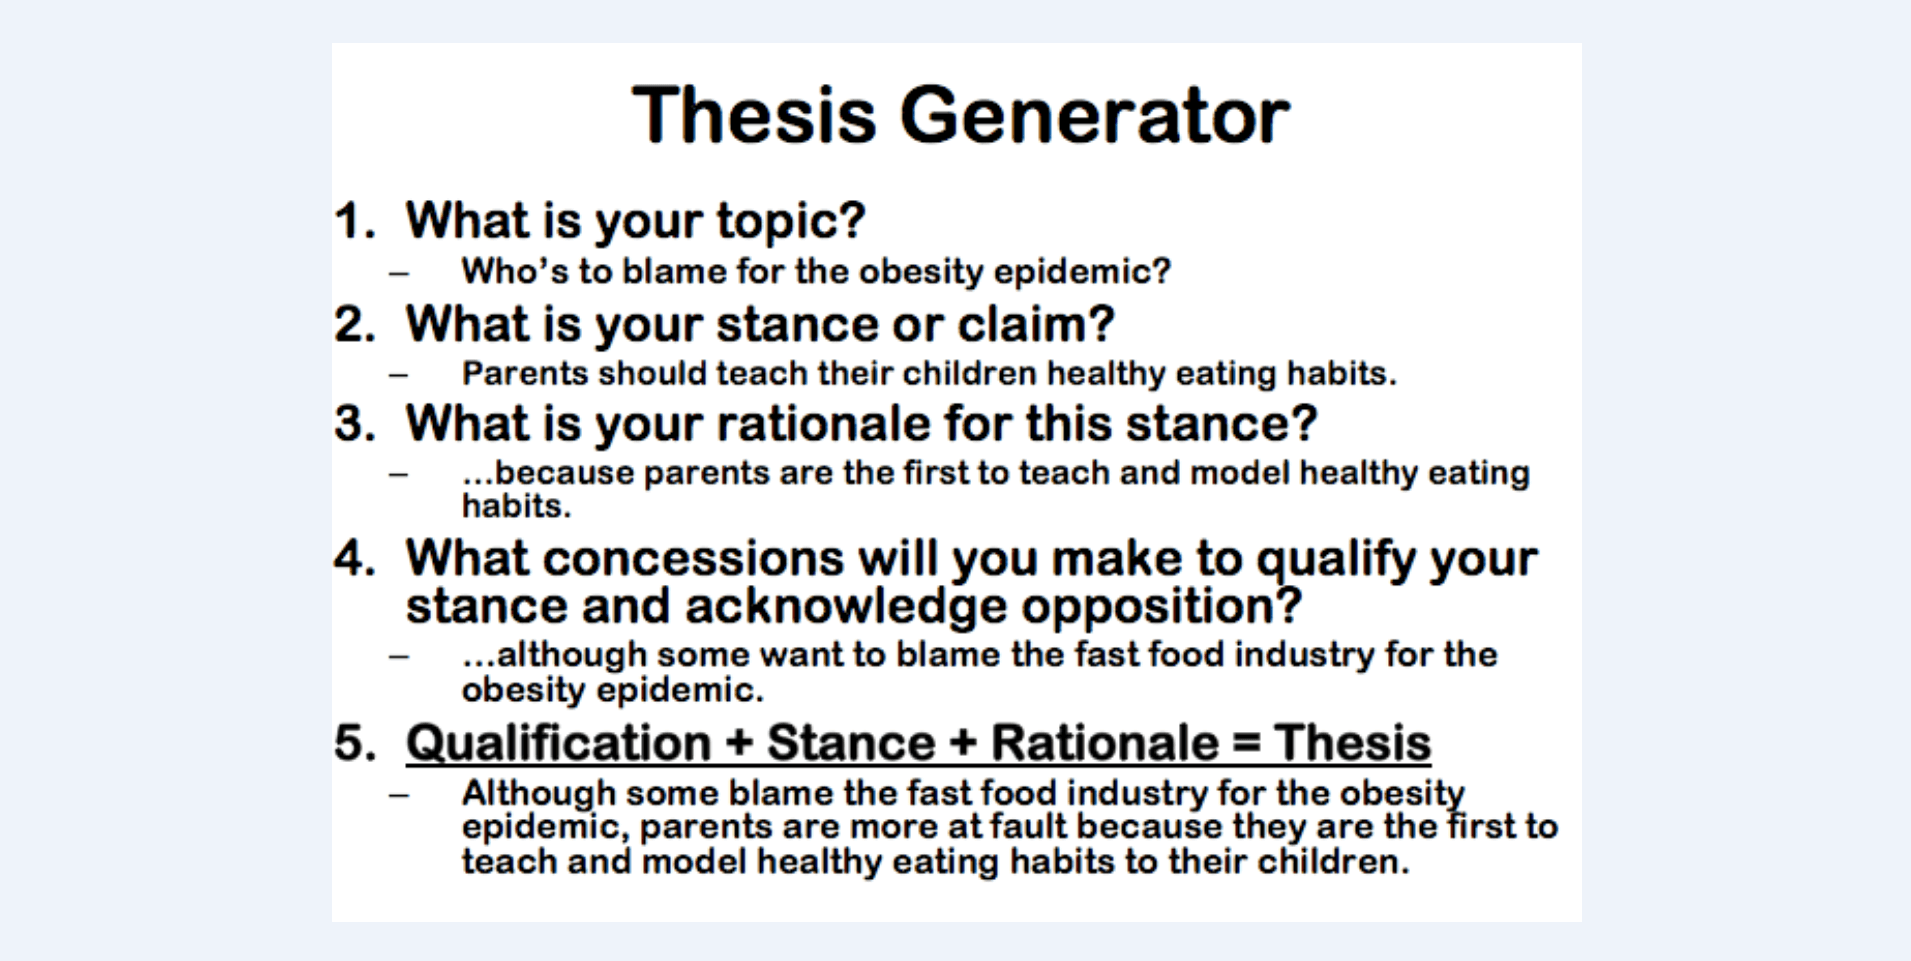 what are the requirements of a thesis statement